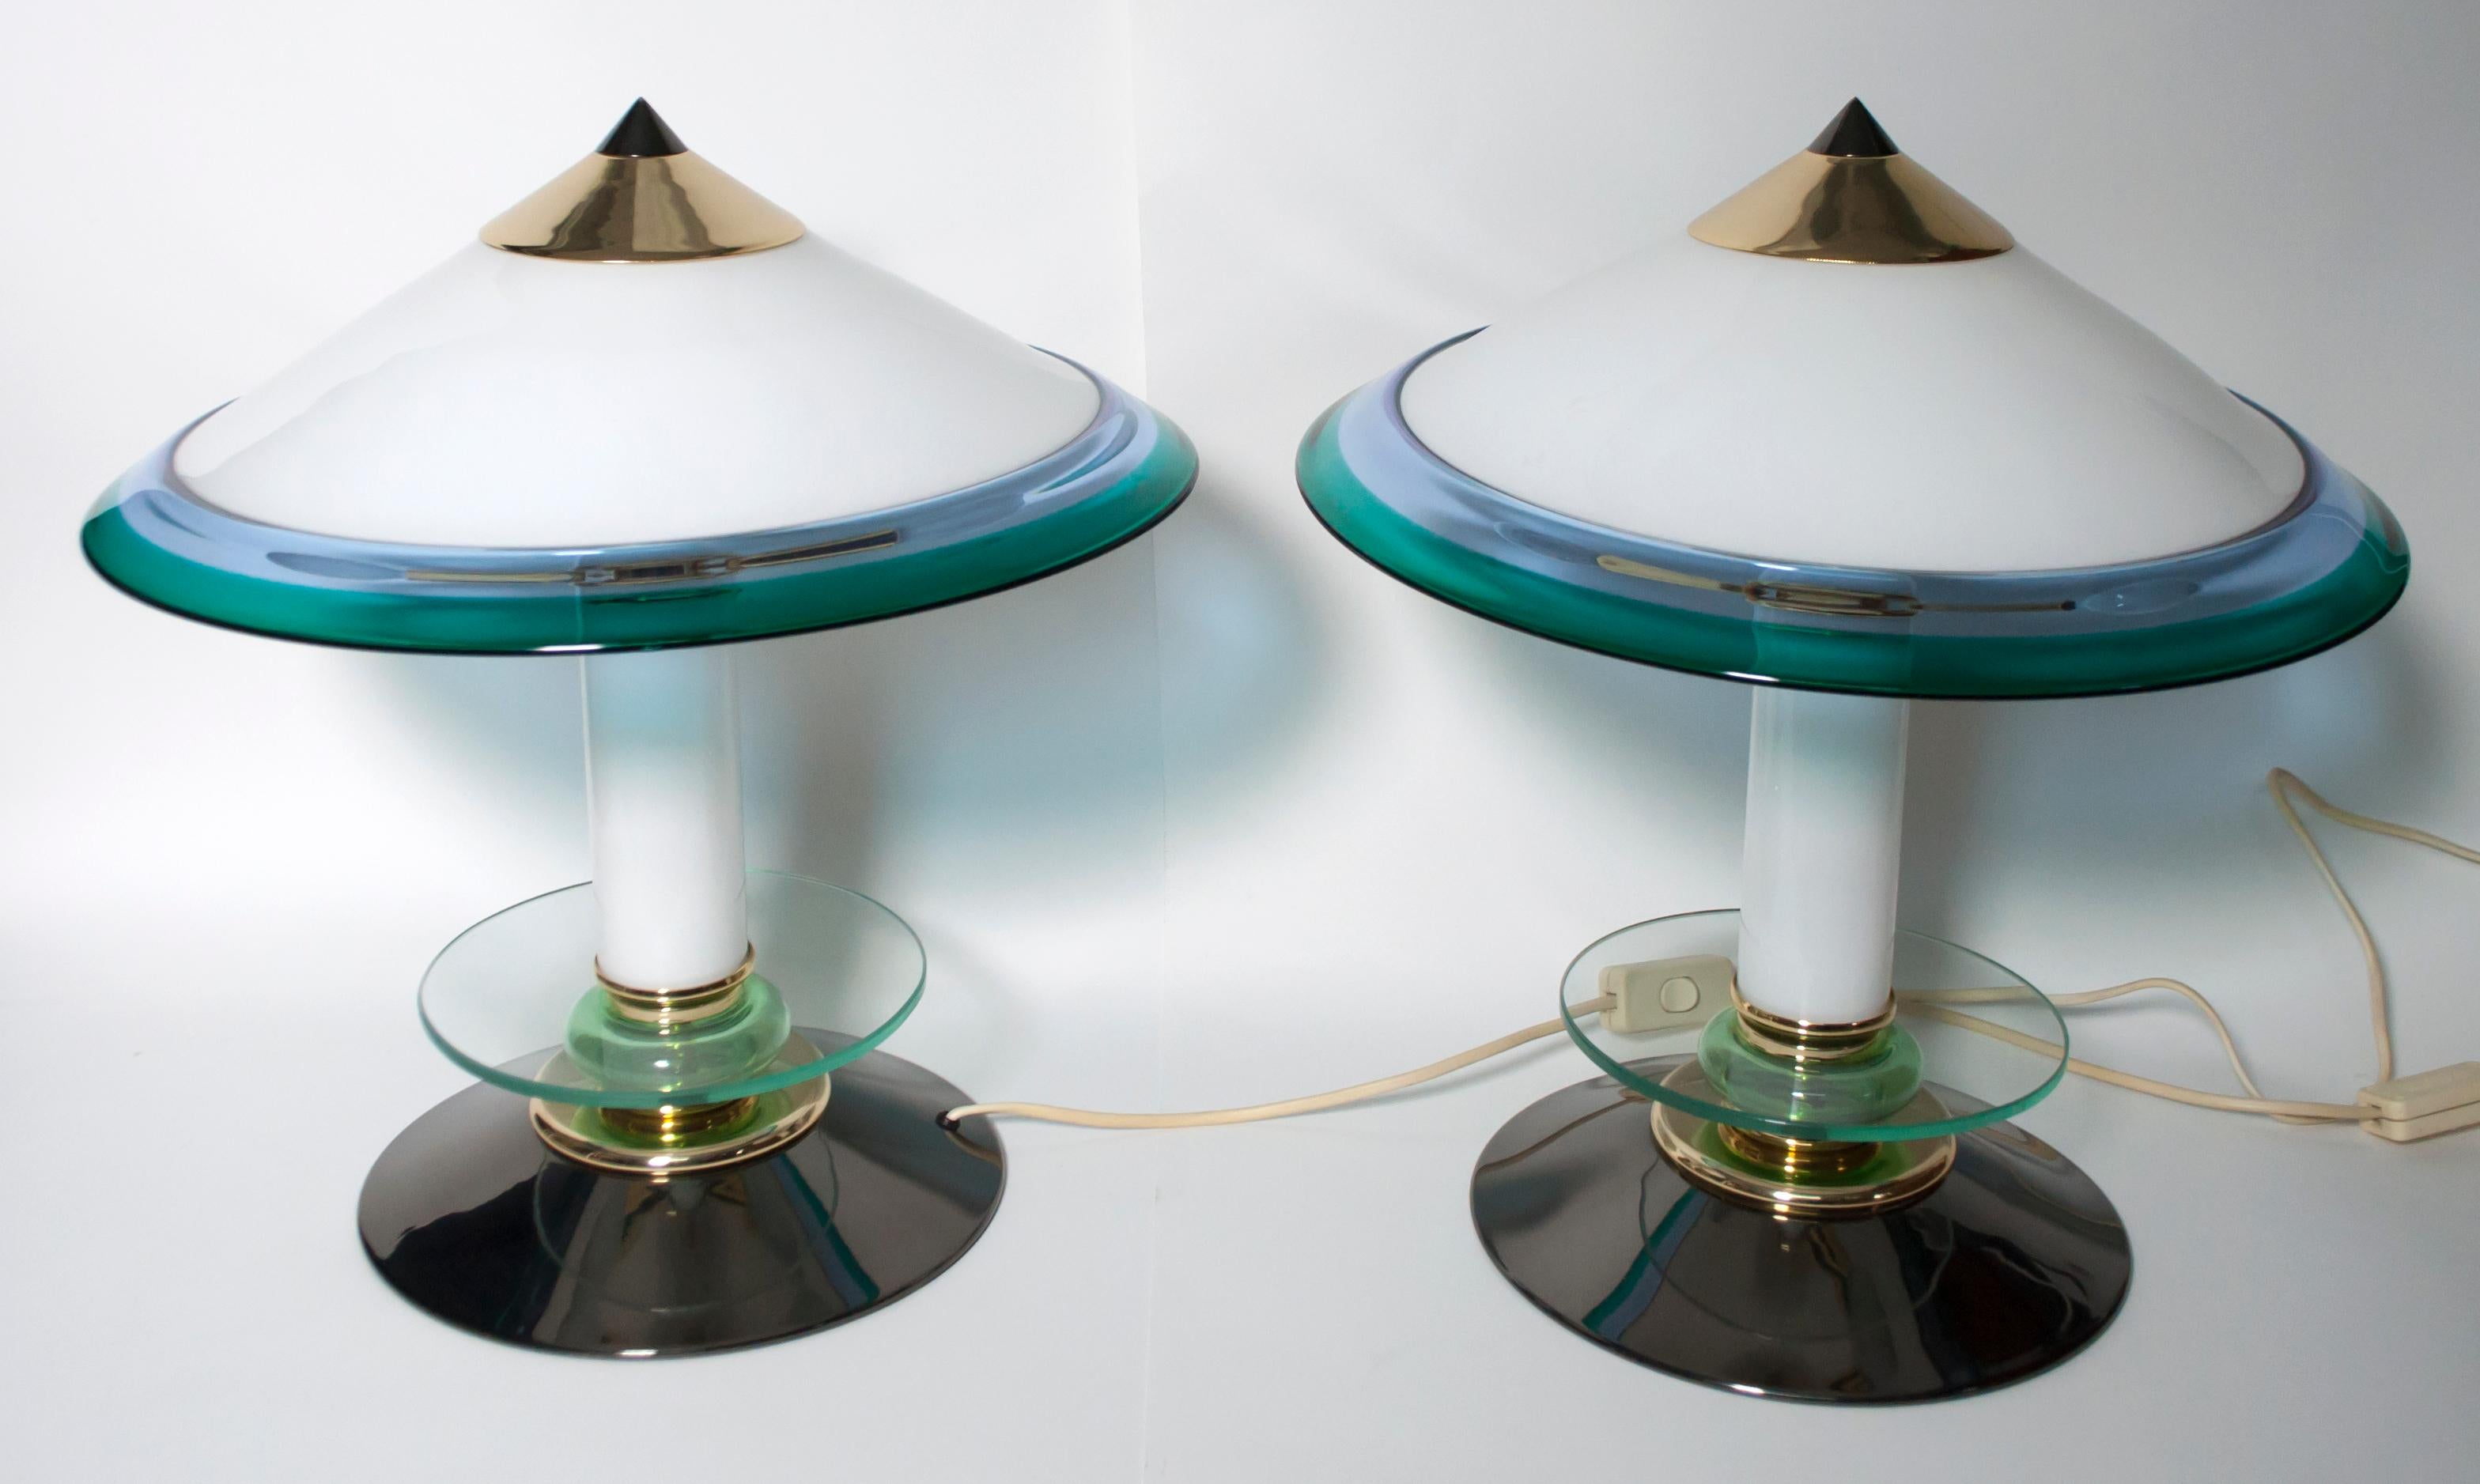 This pair of Murano glass lamps, produced in the 1980s, have a gunmetal metal base and brass parts. They were designed in the style of Ettore Sottsass, in the 1980s.